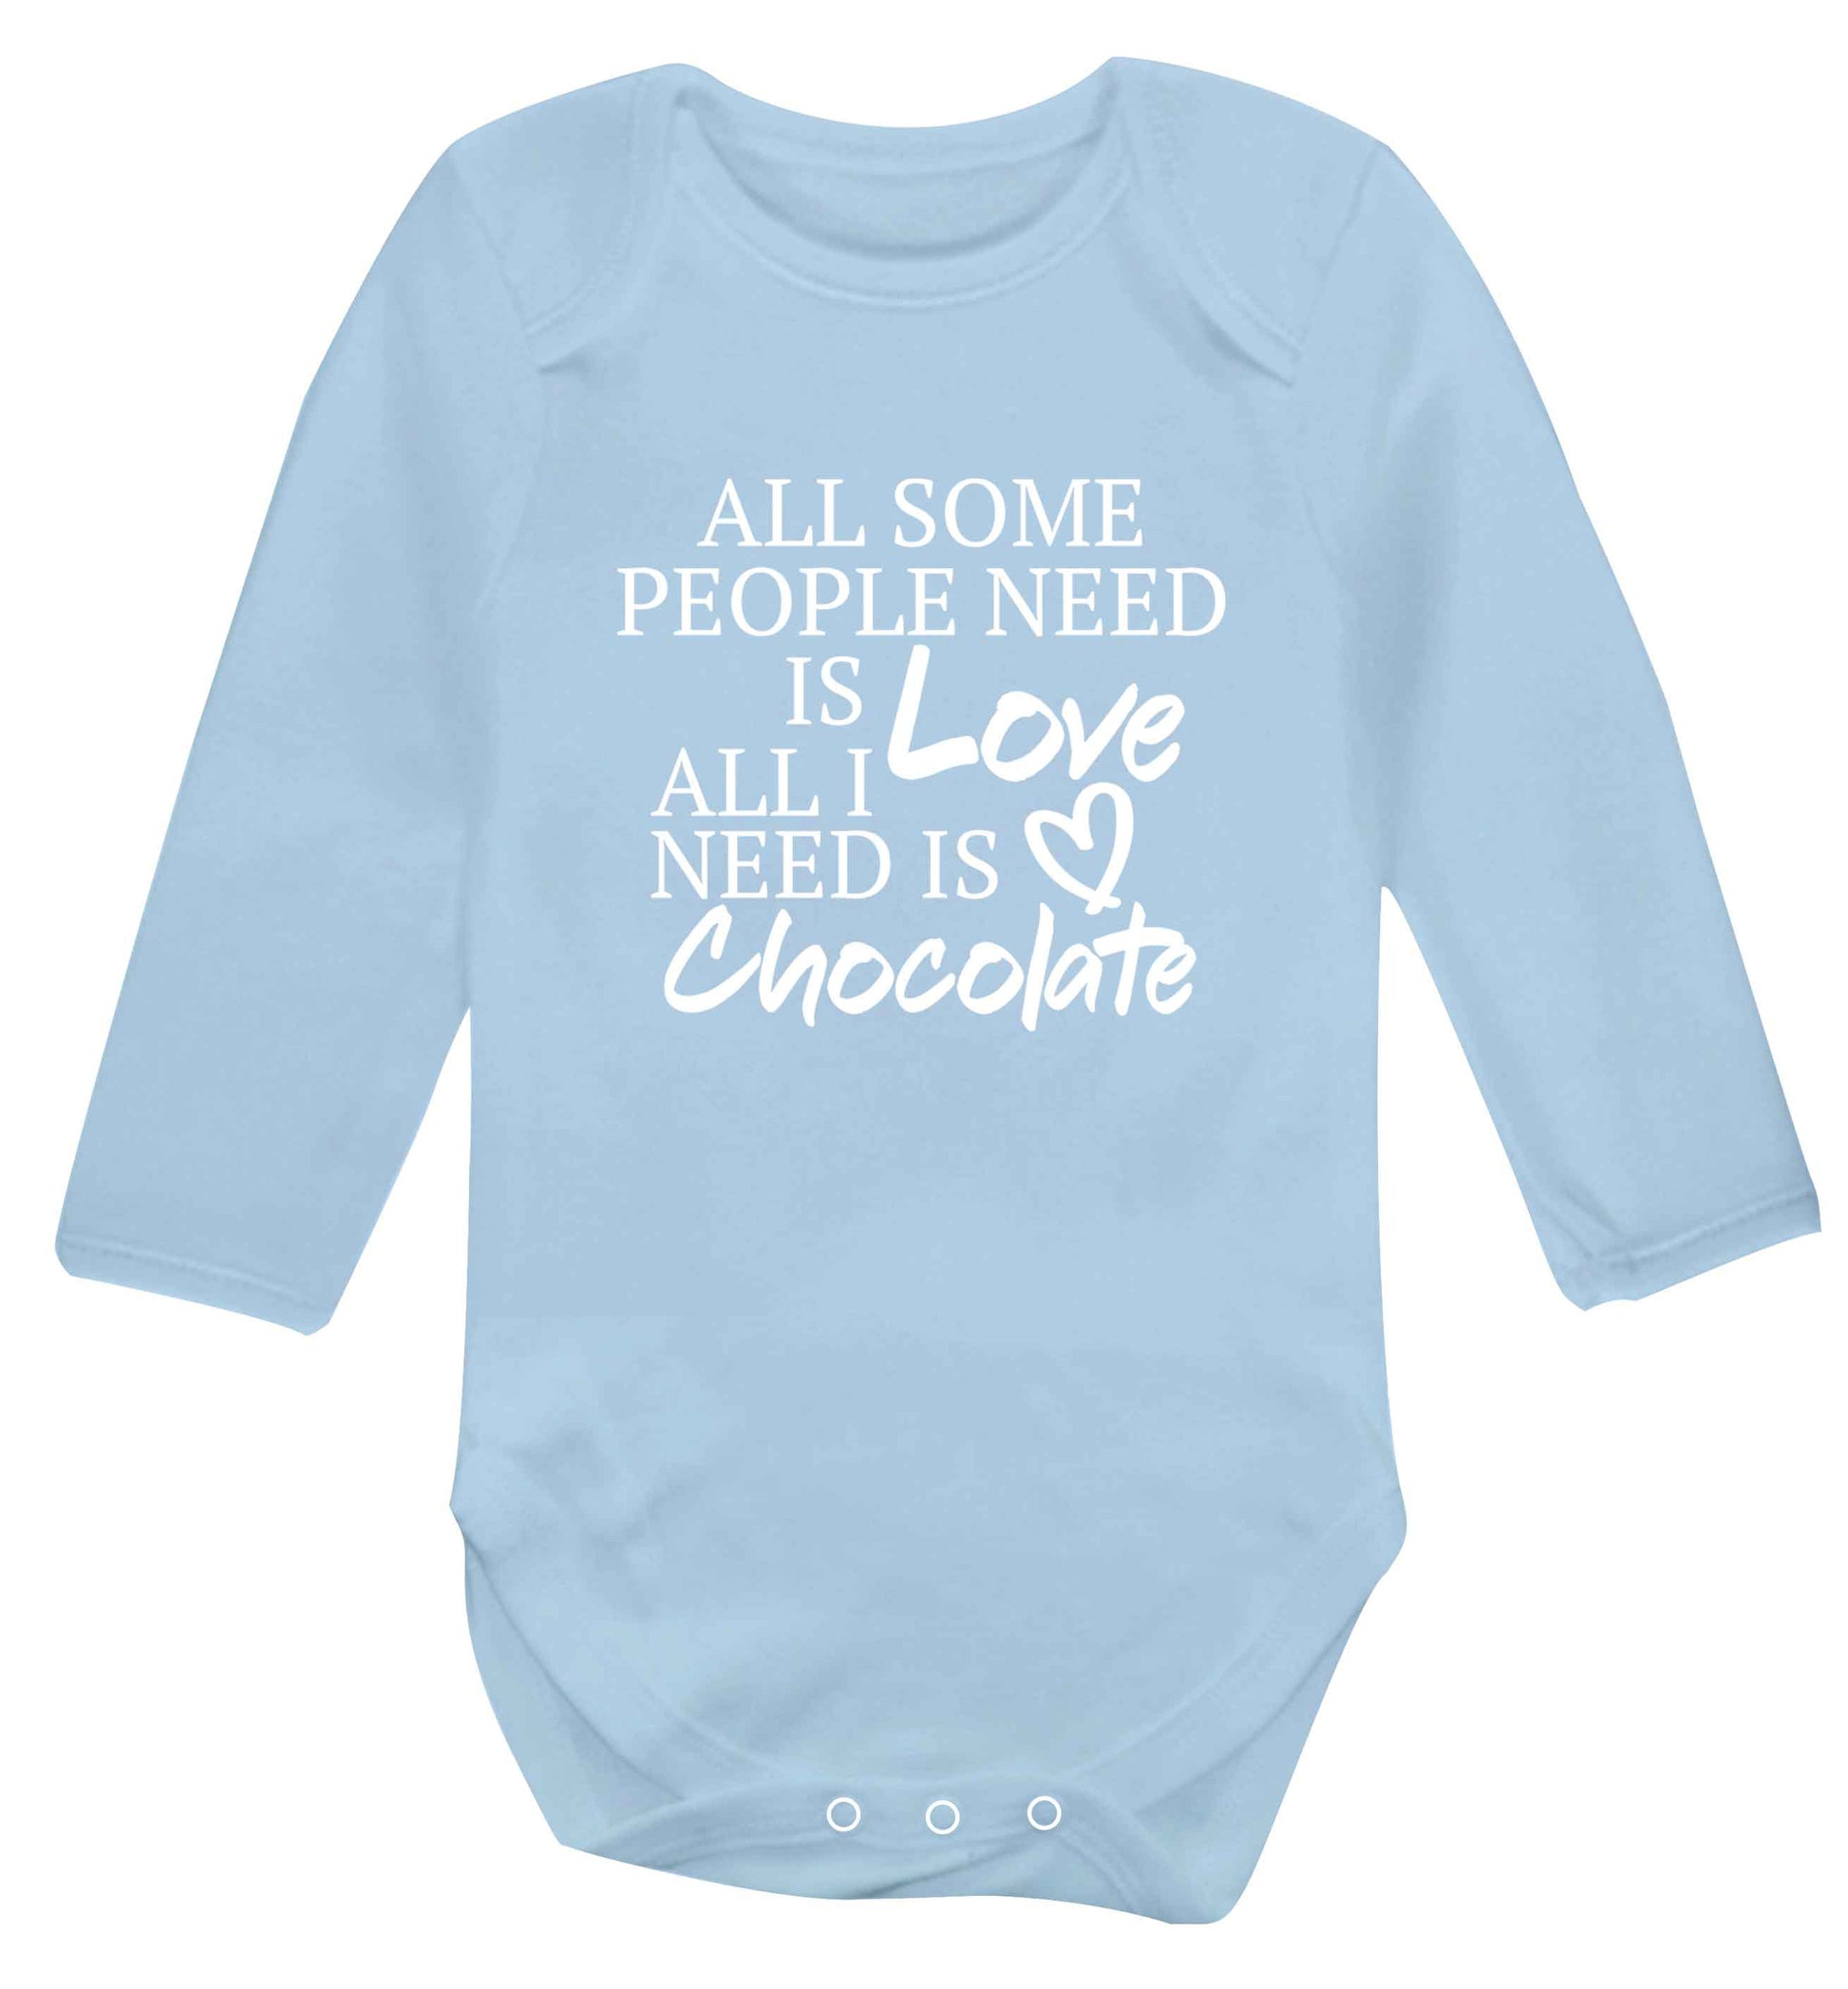 All some people need is love all I need is chocolate baby vest long sleeved pale blue 6-12 months